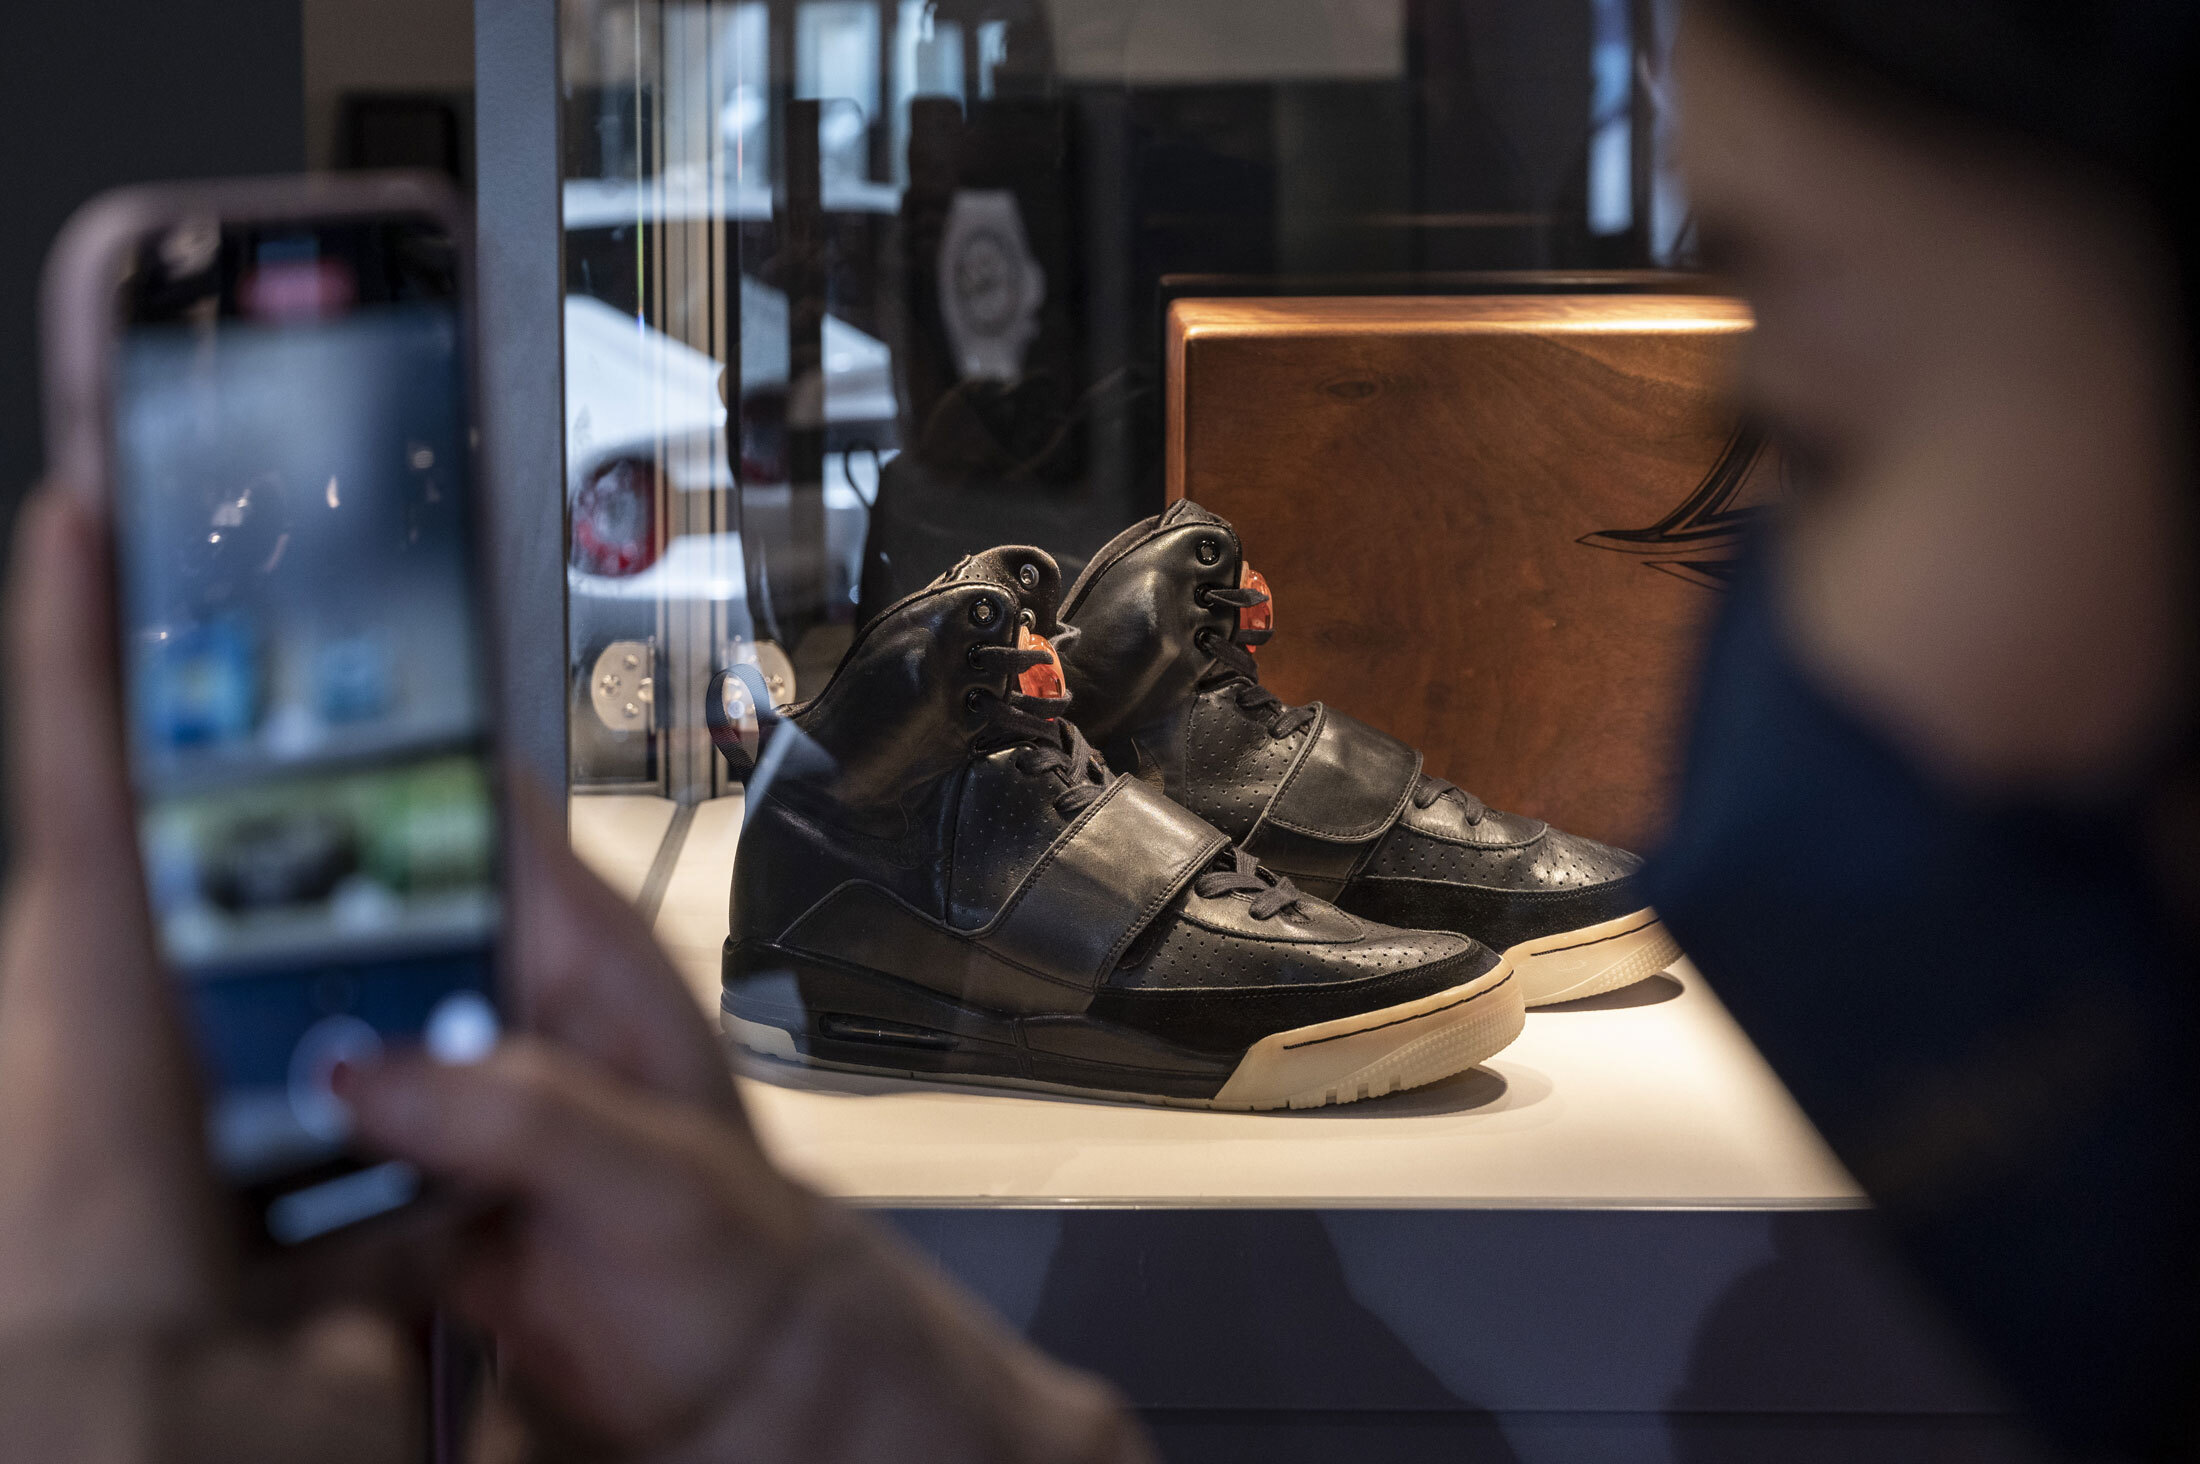 This Nike Air Yeezy Sample Fell in Value From $1.8 million to